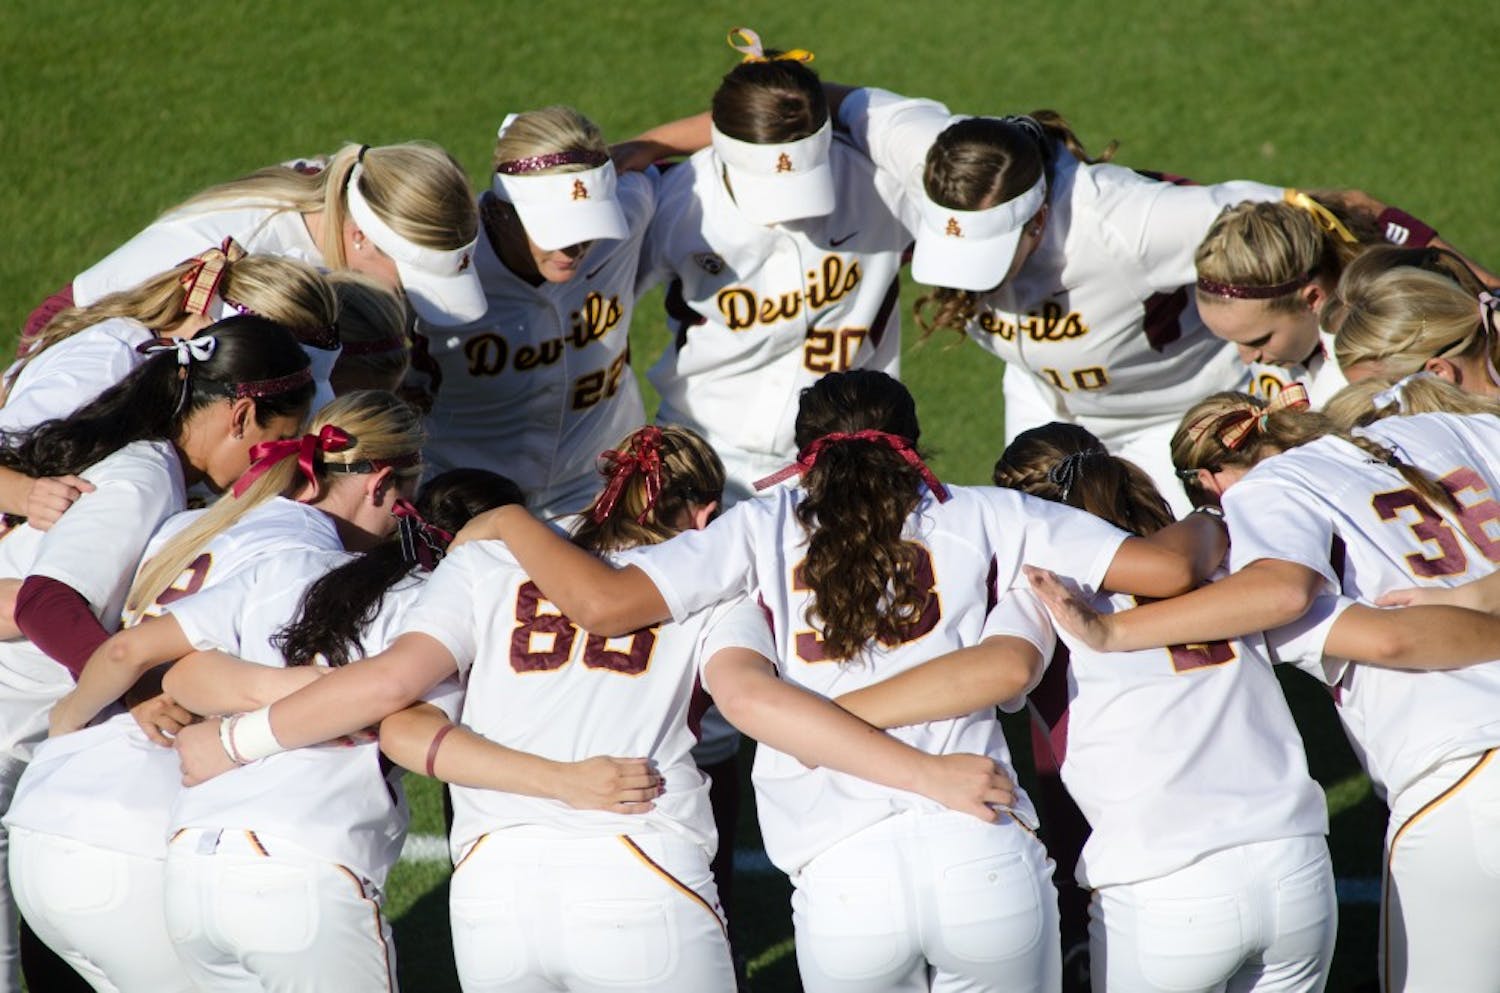 HUDDLE-UP: Members of the ASU softball team huddle before regional play against South Dakota State on May 21. ASU Softball will be traveling to Oklahoma City this week to play in the college World Series.  (Photo by Aaron Lavinsky)